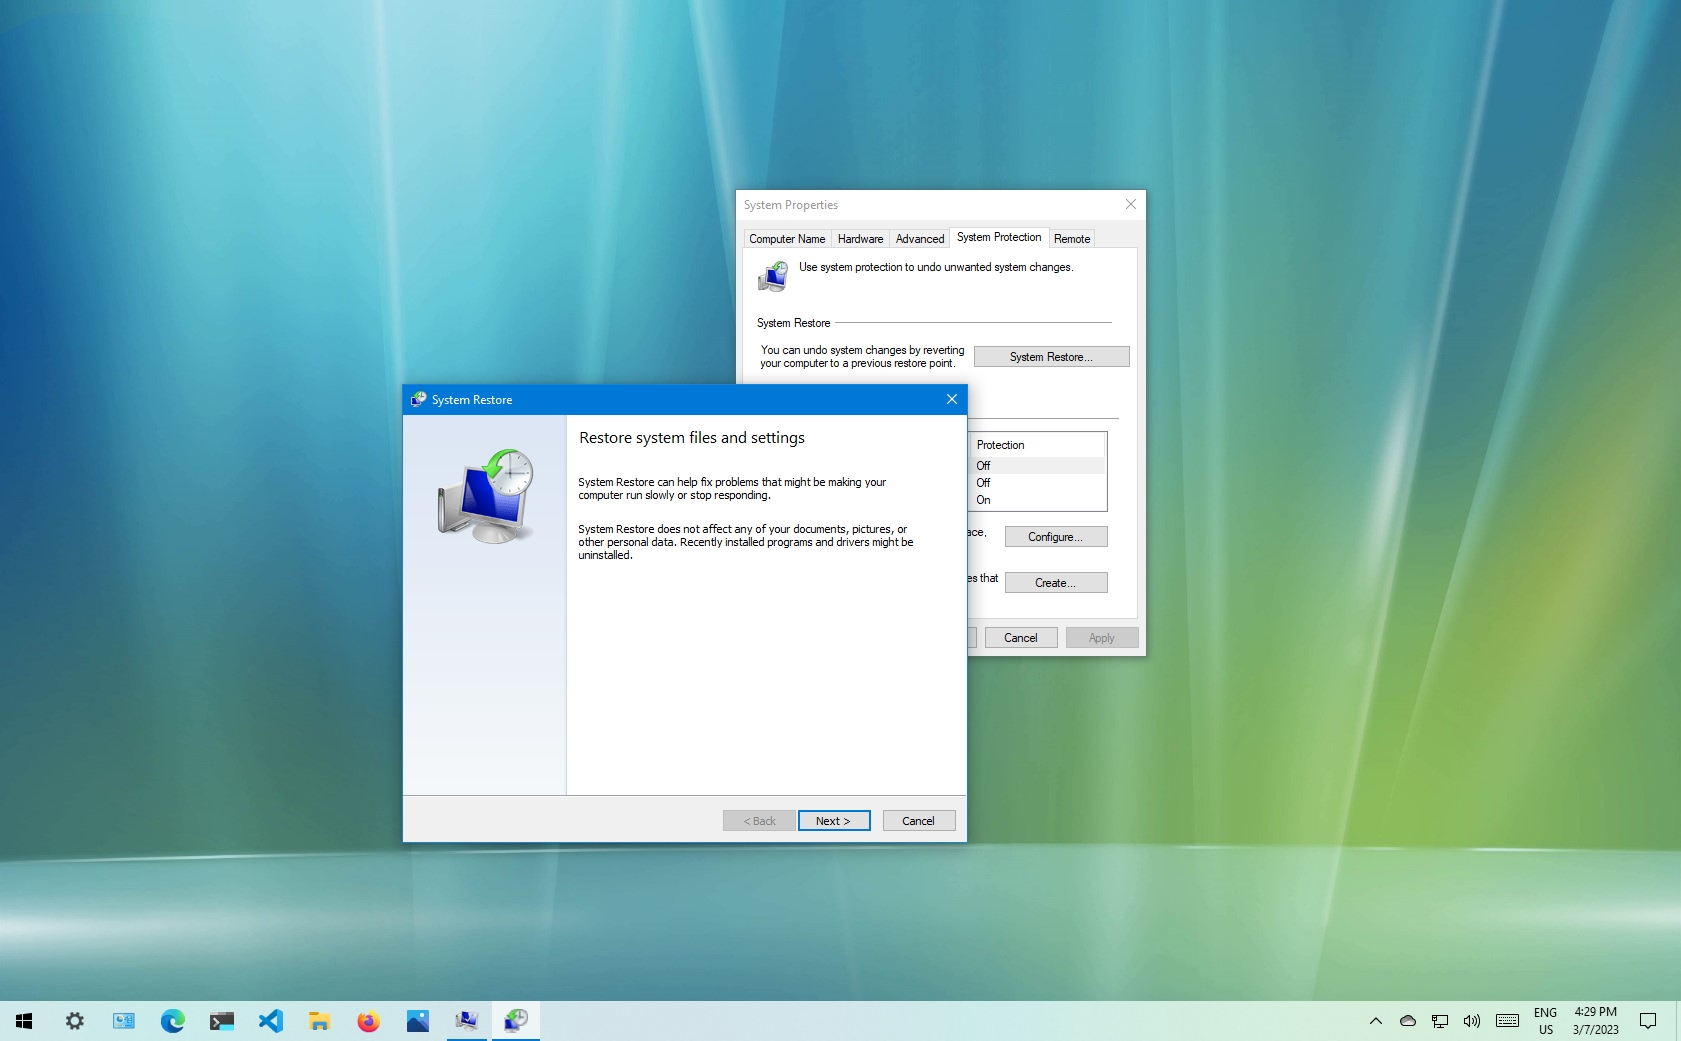 Use the Windows System Restore feature to revert your computer's settings to a previous point in time.
Select a restore point that was created before you started experiencing issues with the associated software.